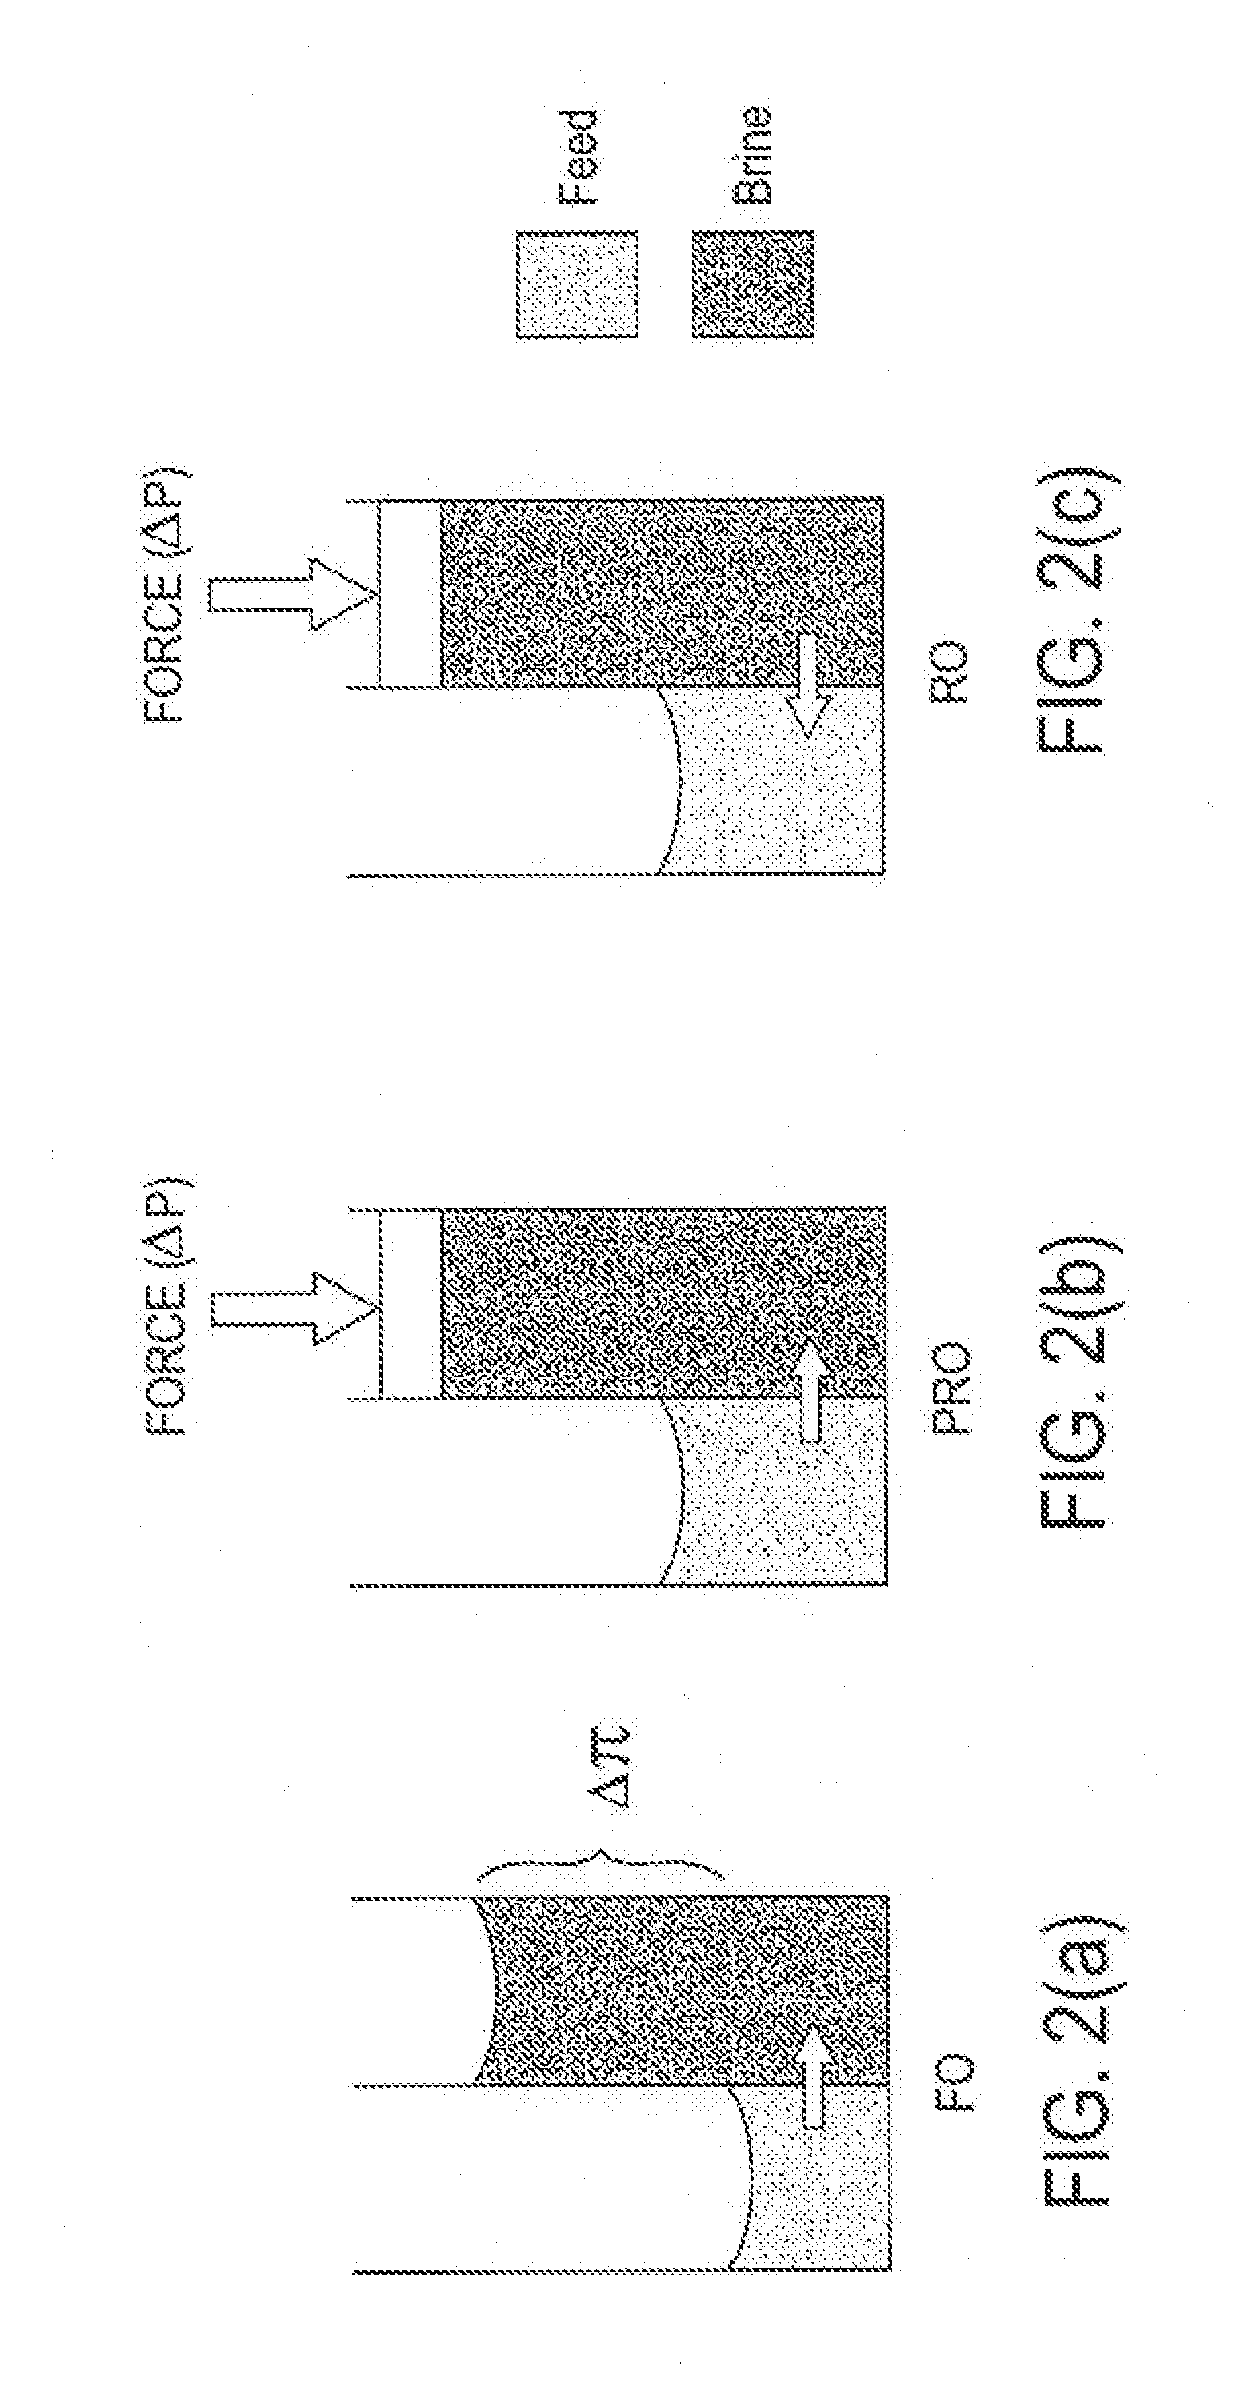 Method and system using hybrid forward osmosis-nanofiltration (h-fonf) employing polyvalent ions in a draw solution for treating produced water